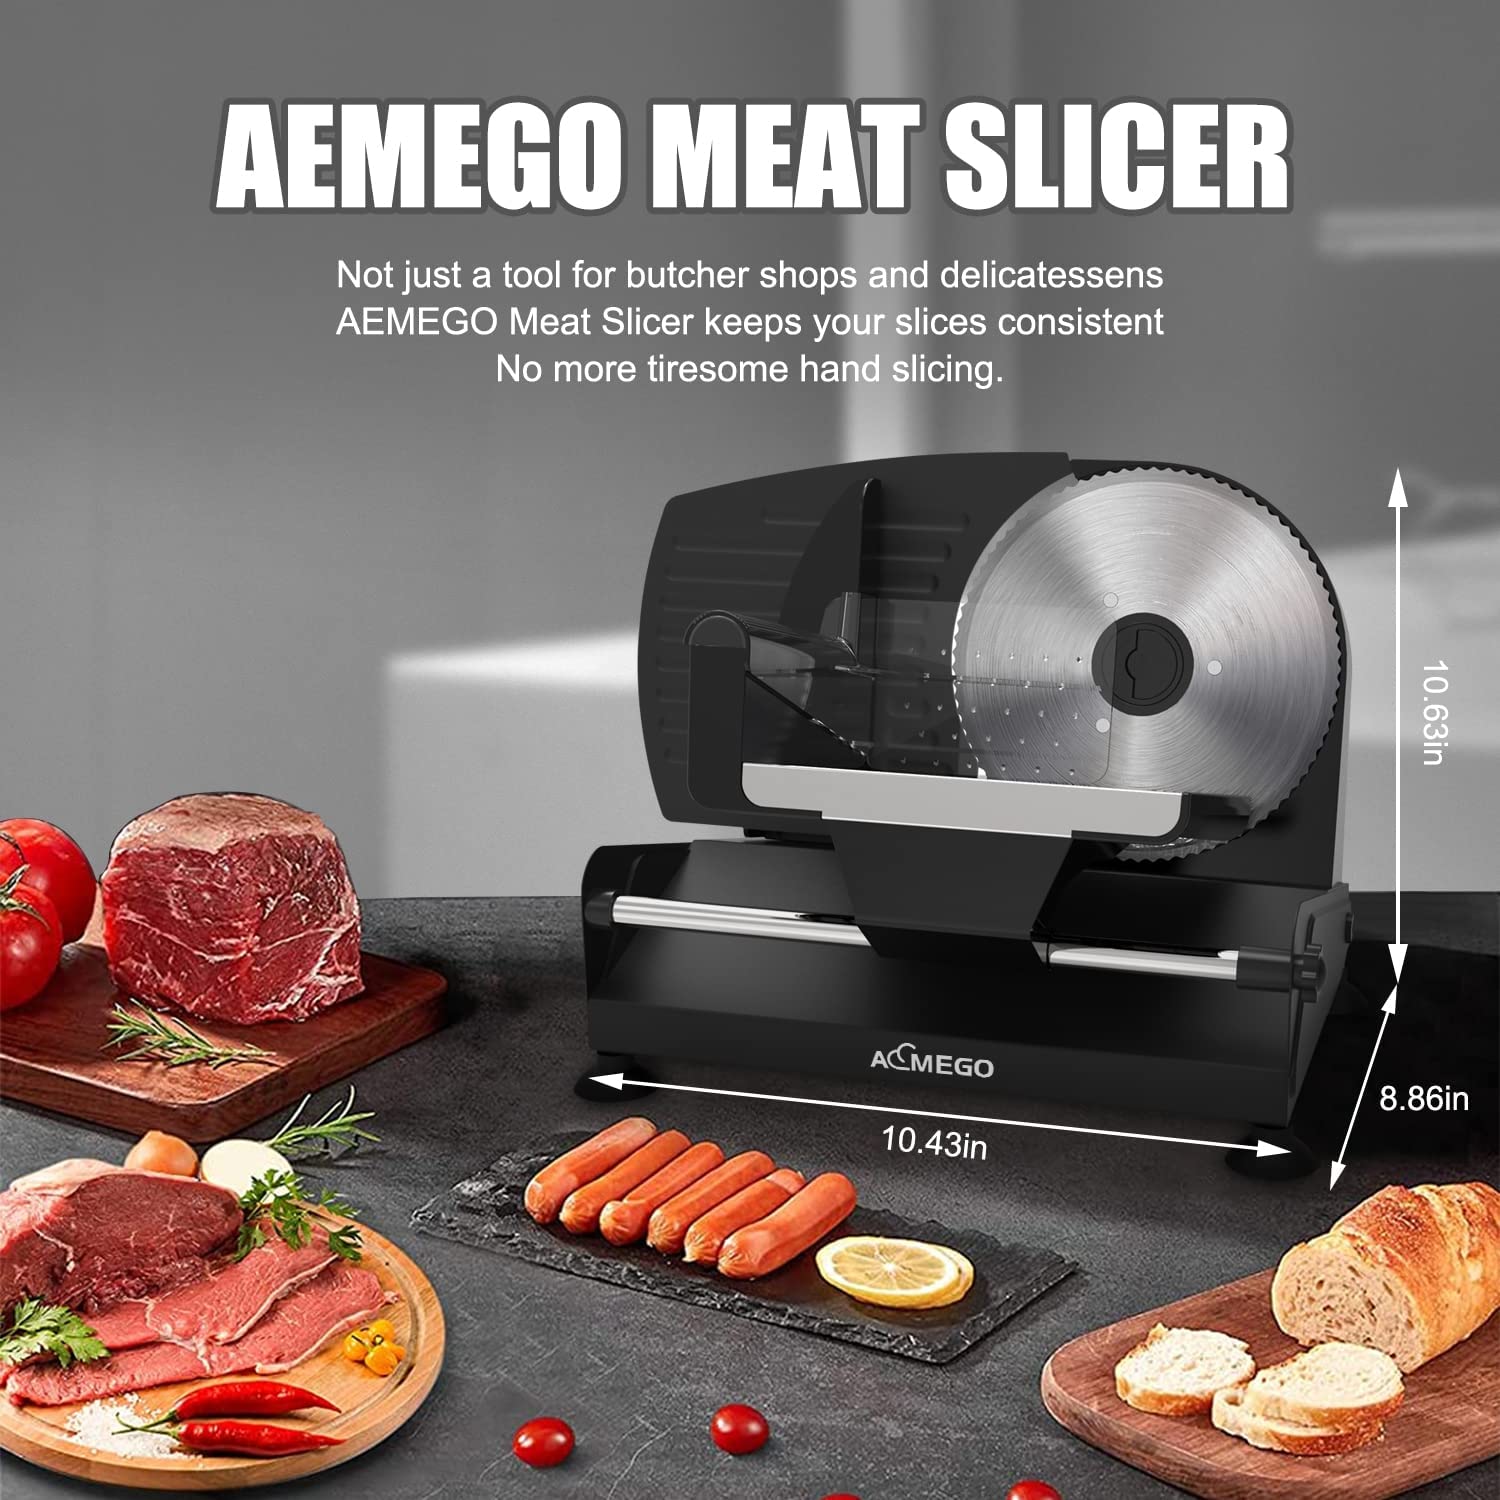 Aemego Electric Meat slicer for Home Use 200W, Aemego Food Slicer with Removable Stainless Steel Blade, Adjustable Thickness, Meat Cut